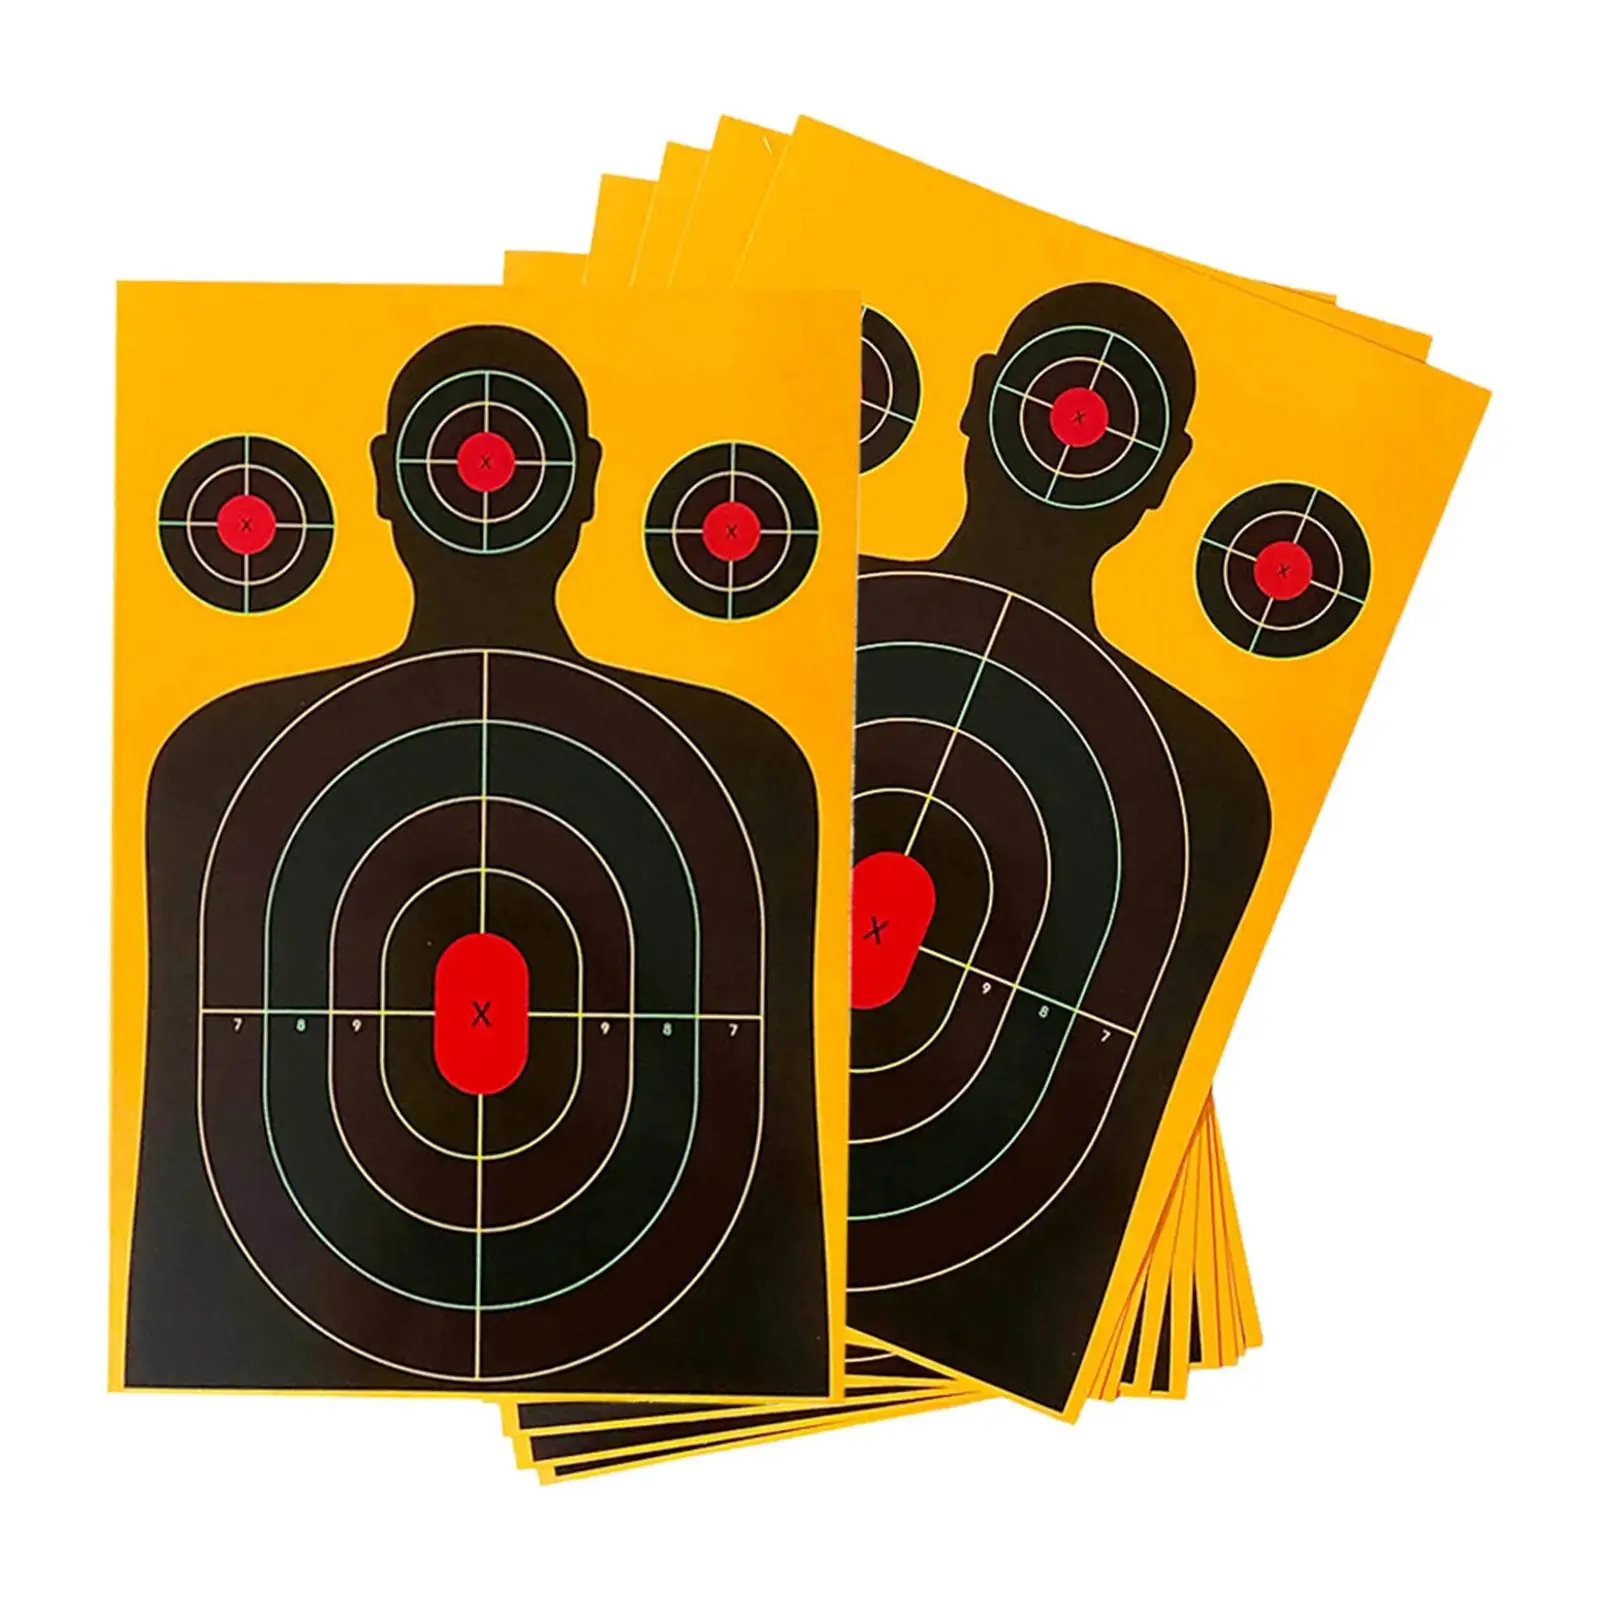 10Pcs Silhouette Target Outdoor Activities Letter Partition without Stand Professional Hunting Silhouette Target Training Target